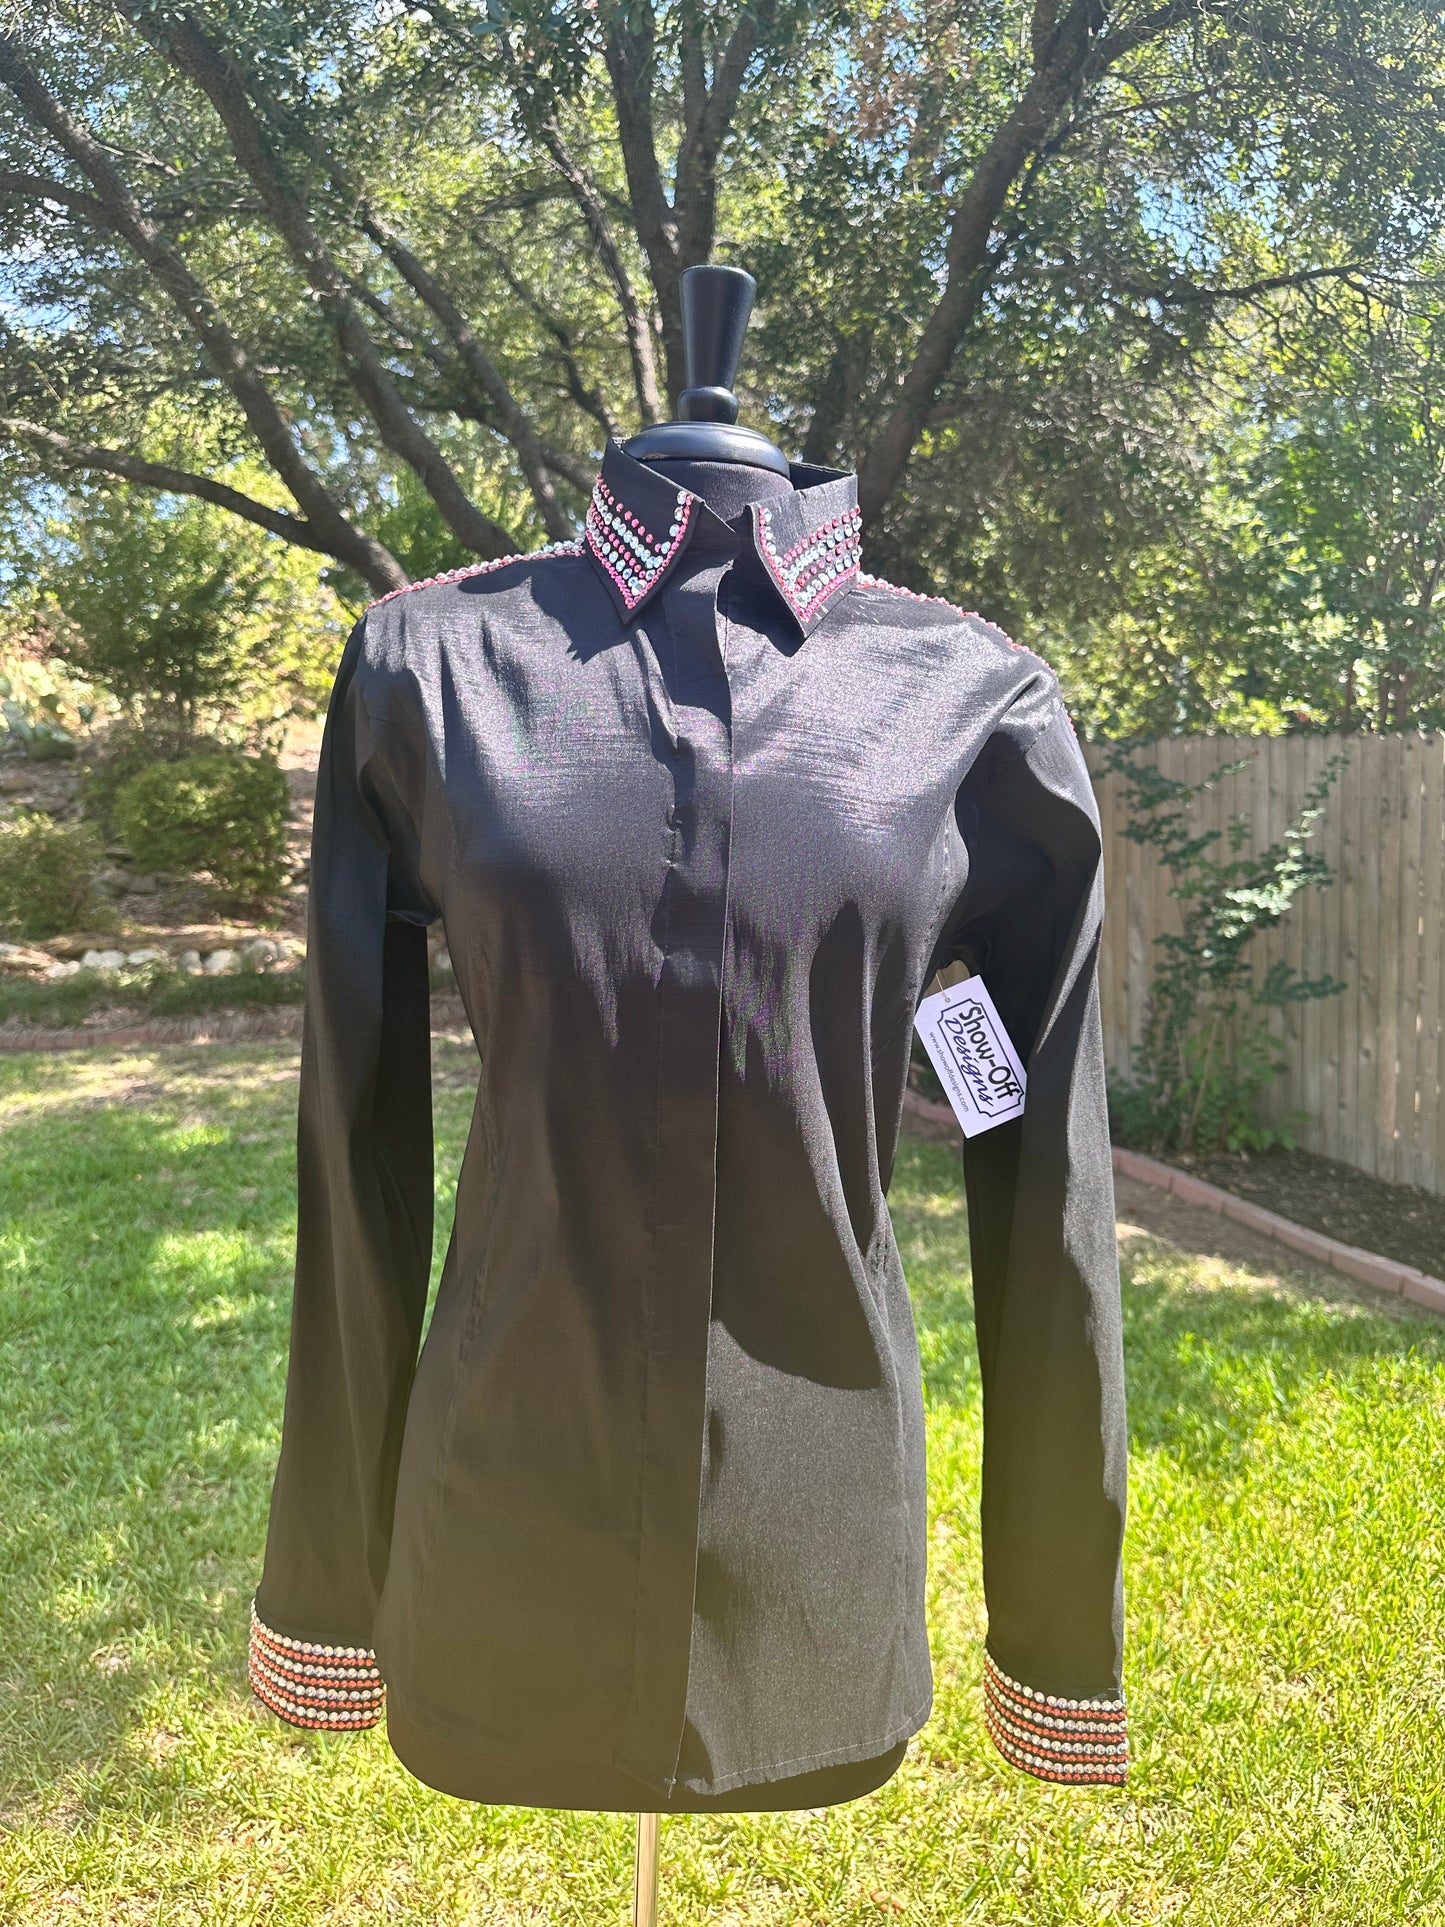 Extra Large day shirt stretch taffeta black hidden zipper with corals and clears